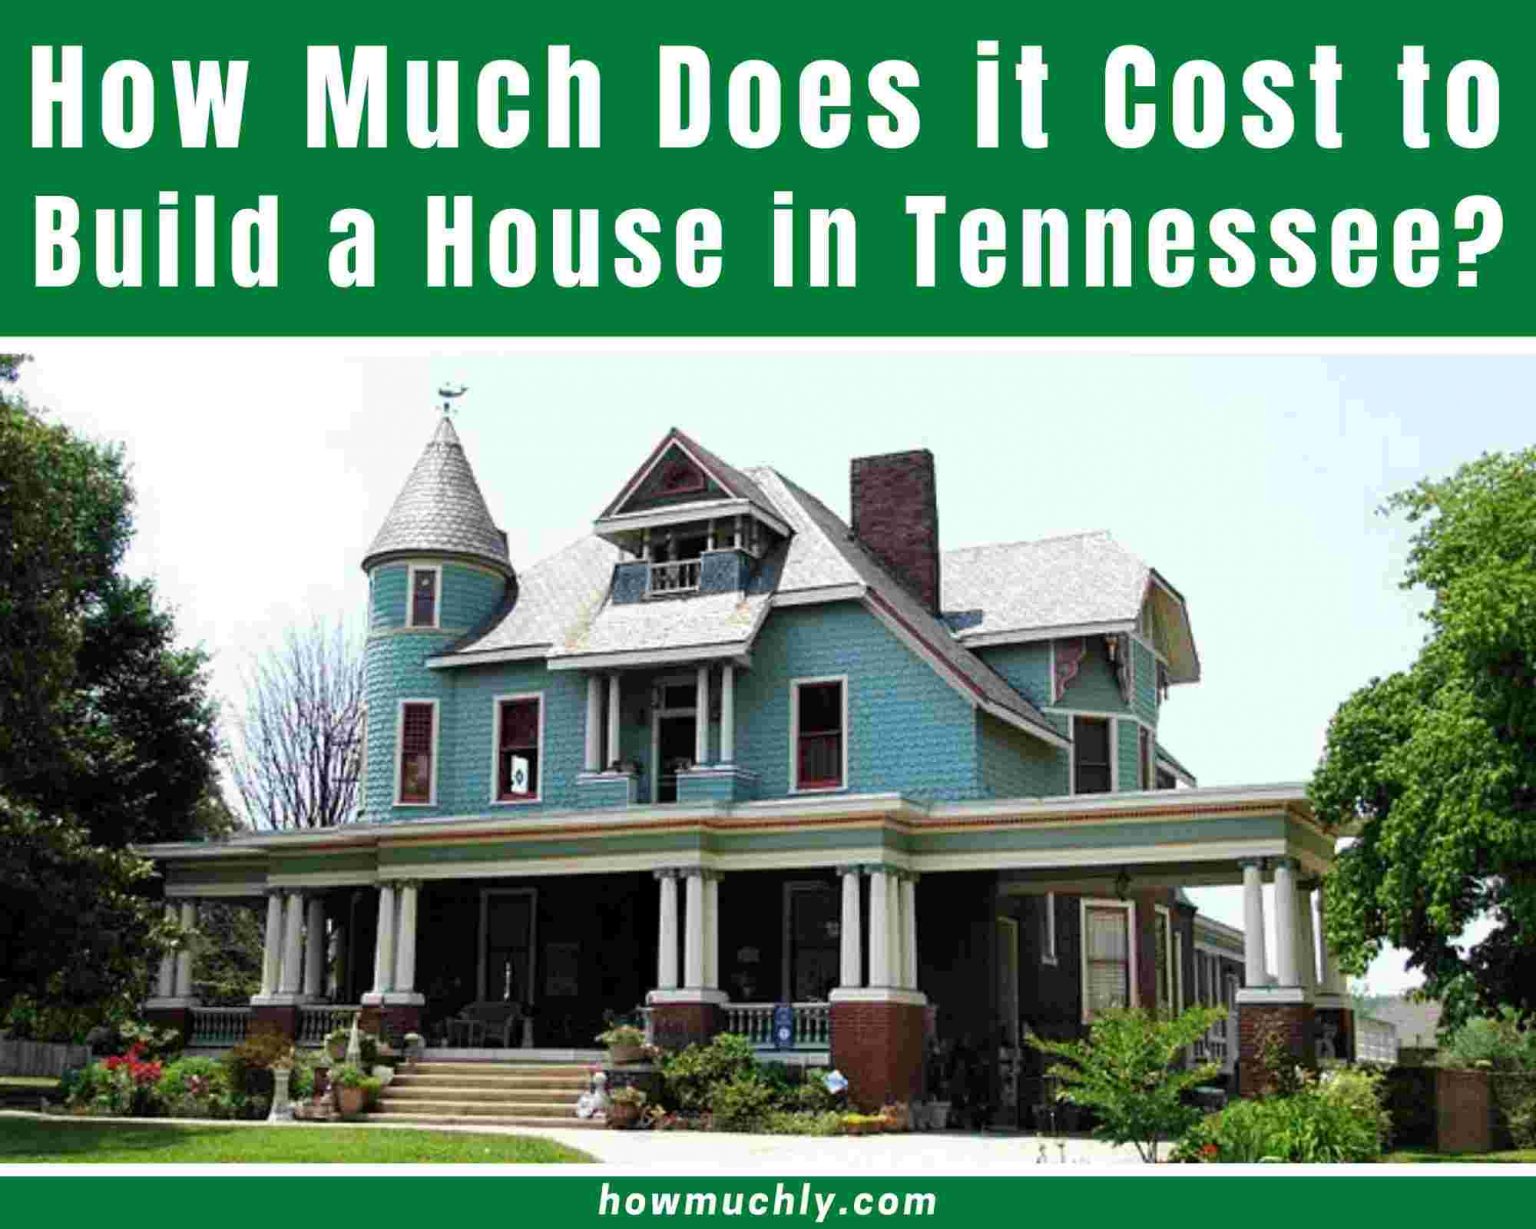 How Much Does it Cost to Build a House in Missouri? MO 2022